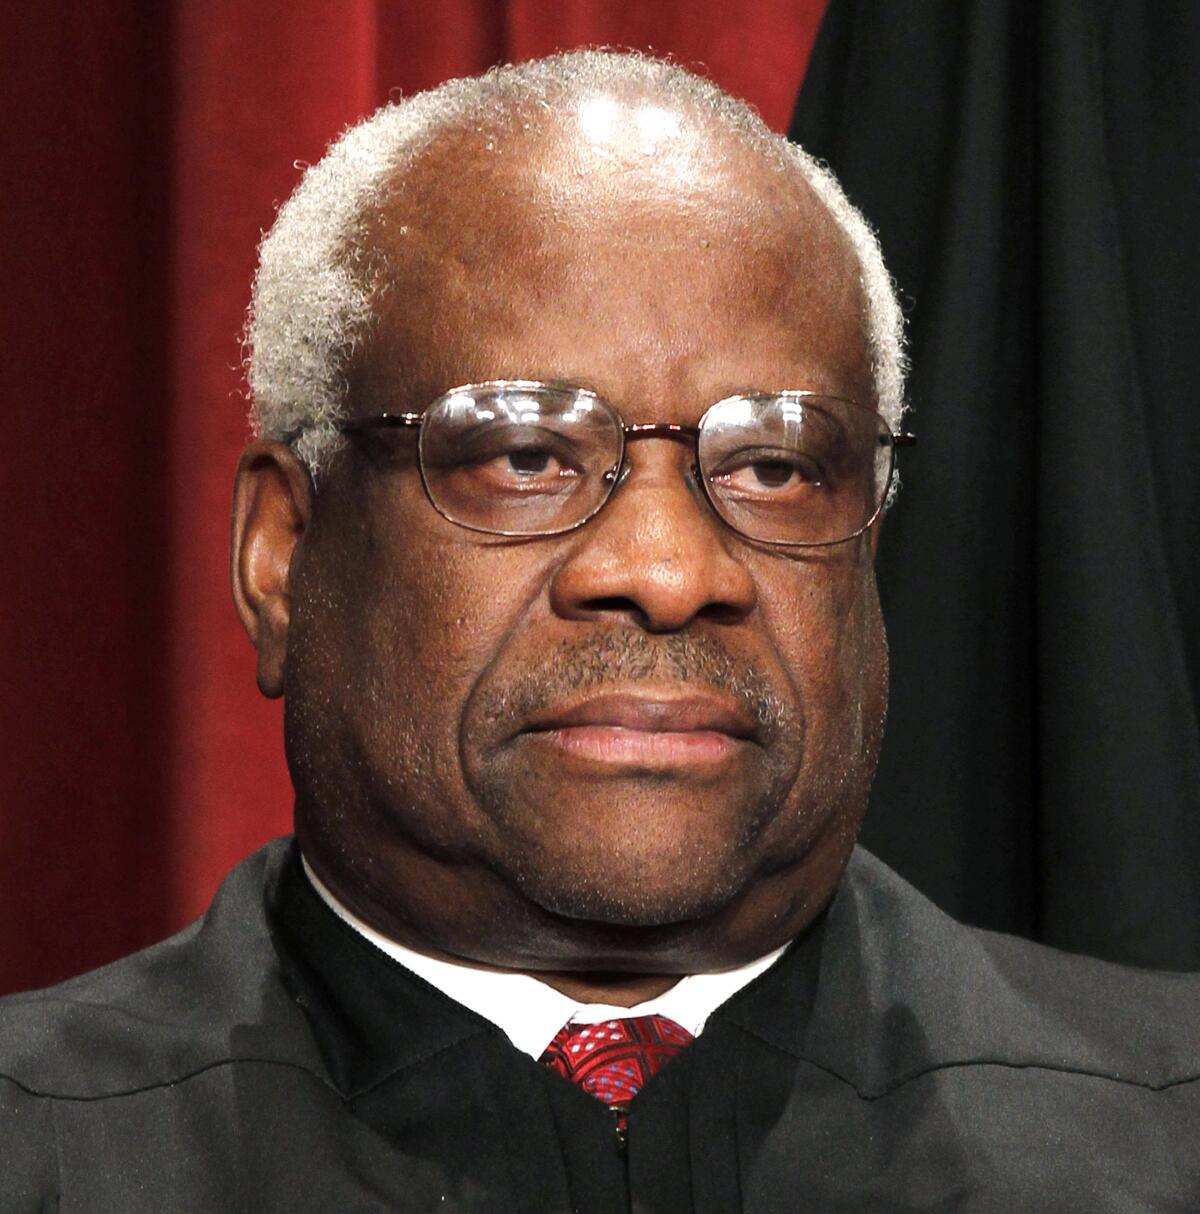 Associate Justice Clarence Thomas 